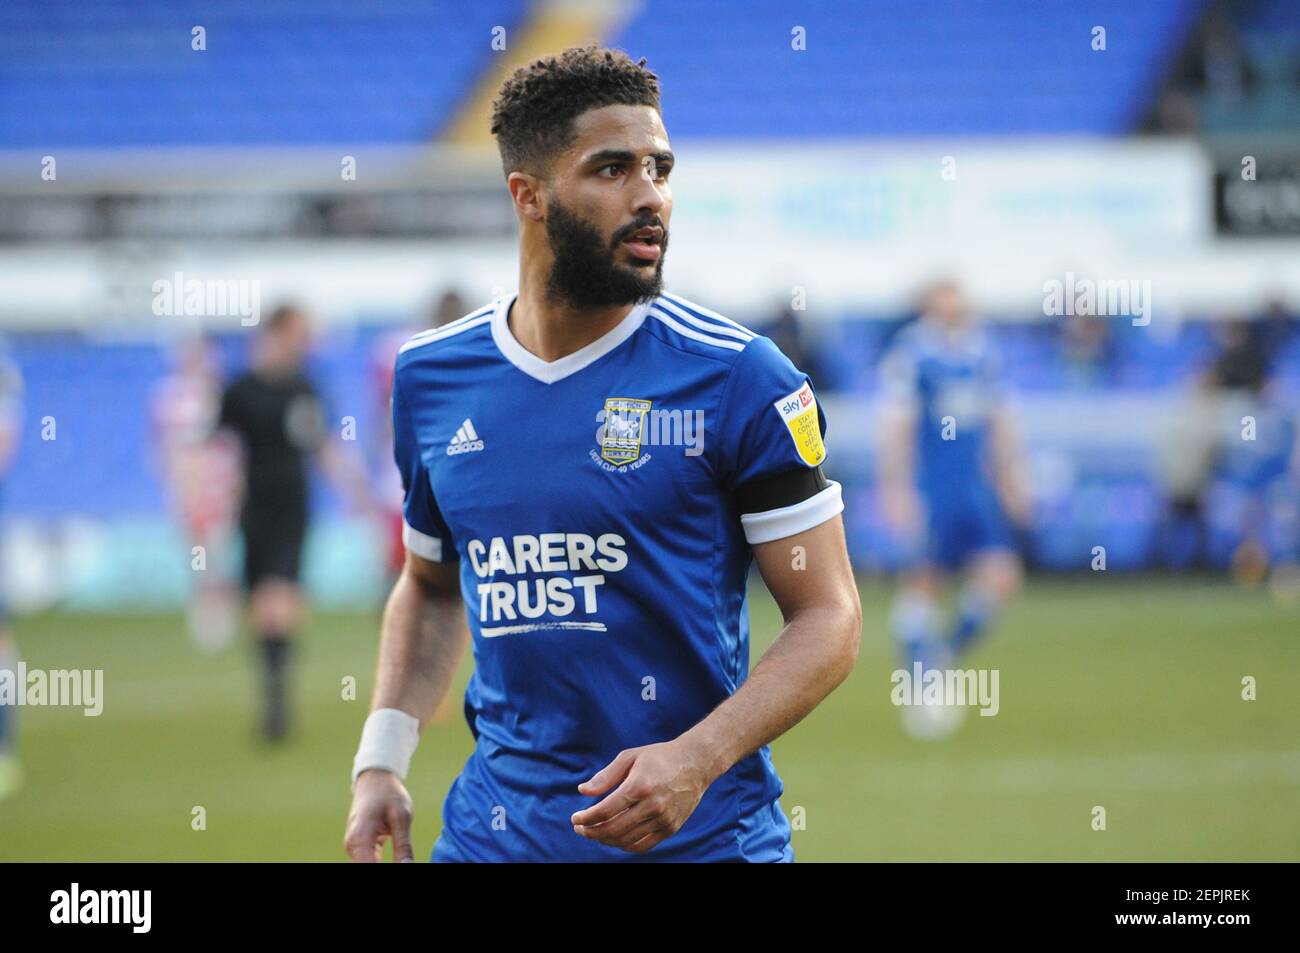 Ipswich, UK. 27th February 2021Ipswichs Keanan Bennetts during the Sky Bet League 1 match between Ipswich Town and Doncaster Rovers at Portman Road, Ipswich on Saturday 27th February 2021. (Credit: Ben Pooley | MI News) Credit: MI News & Sport /Alamy Live News Stock Photo